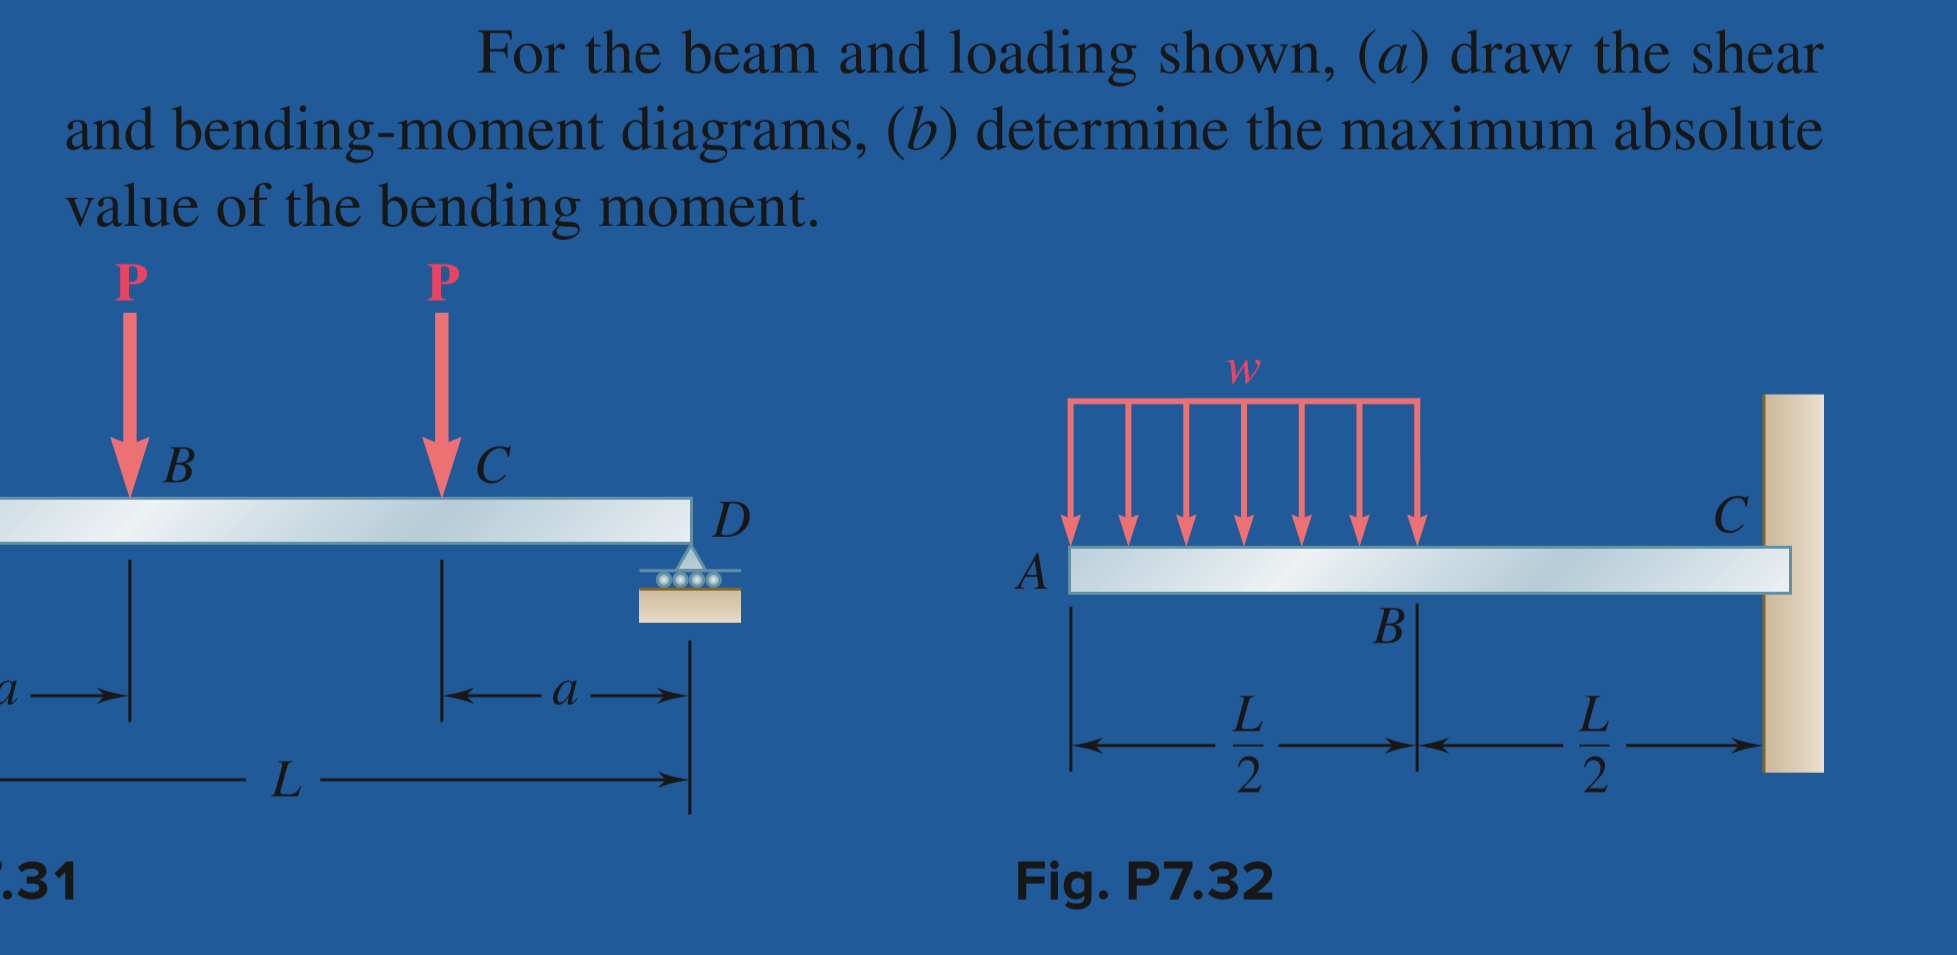 Перевести load. Shear Force and bending moment. Shear and moment diagram for a Beam. Bending moment Formula. Bending moment of the ship.